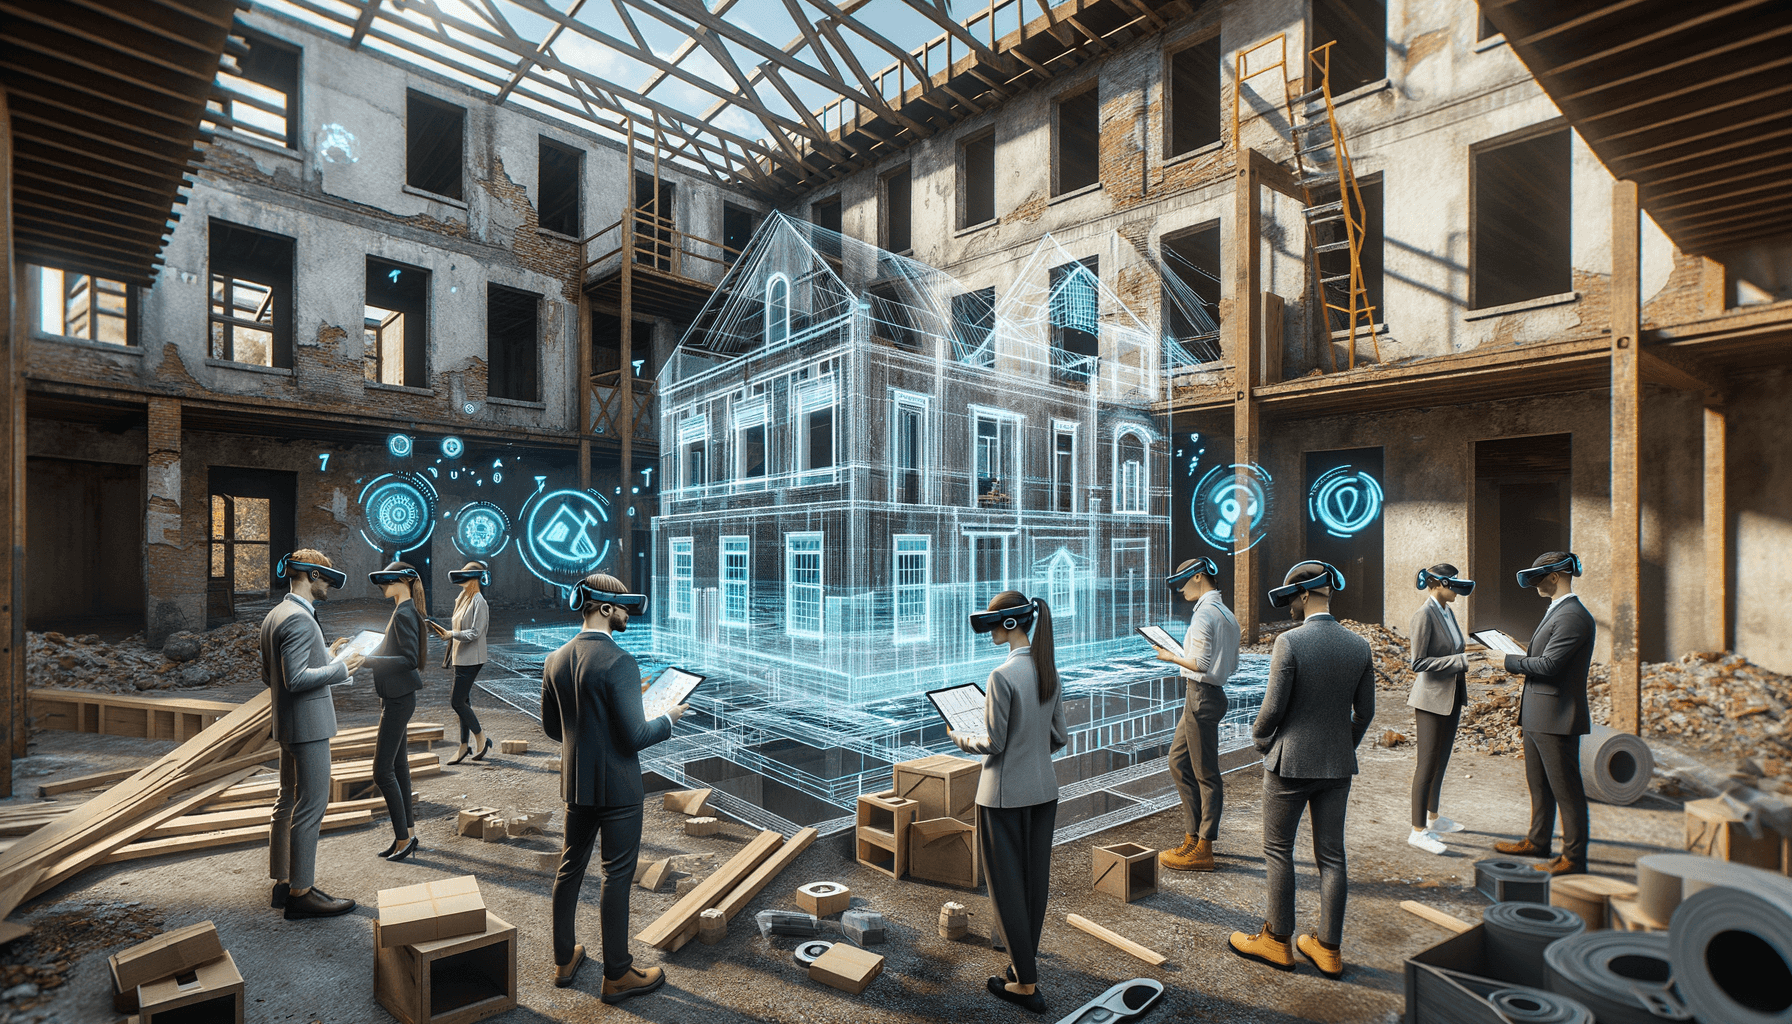 "Augmented Reality Elevates Construction Training: Explore Gravity Jack's AR Simulator Cutting Error Rates by 20% in Washington Project - The Future of Architectural Precision and Teamwork 🏗️ #ARconstruction #GravityJack #InnovationInBuilding"